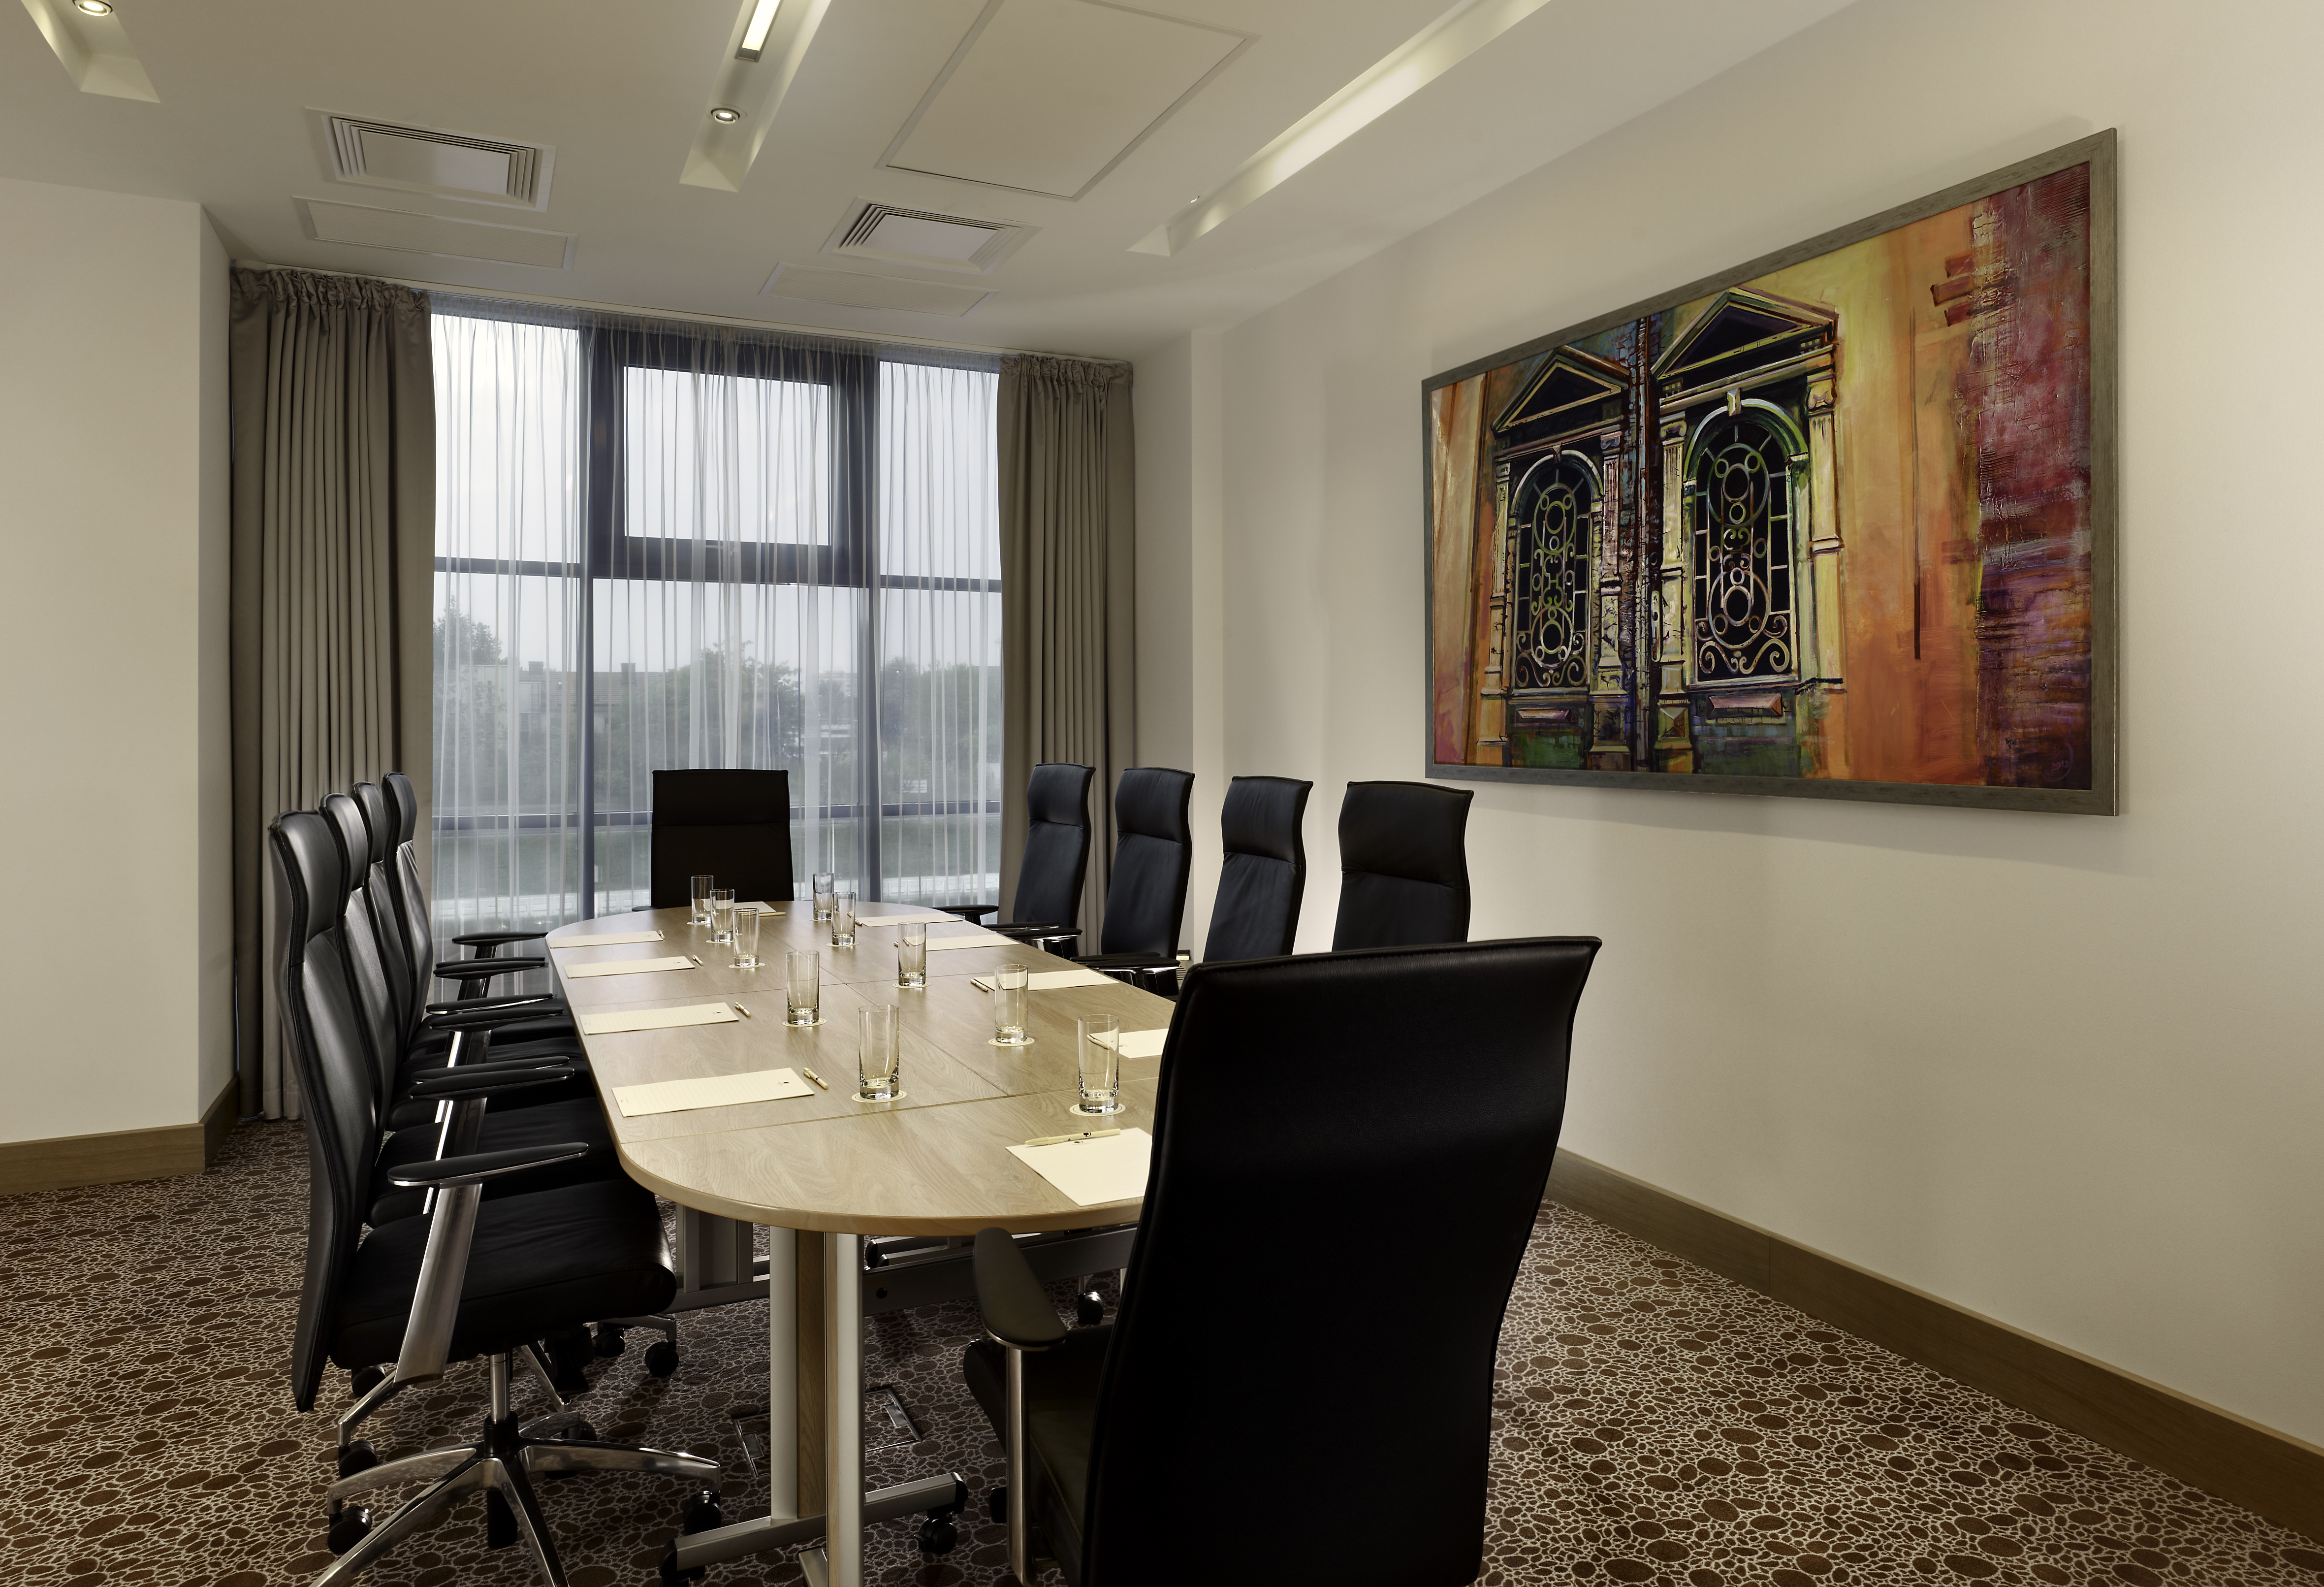 Window With Sheer Drapes, Wall Art, and Seating for 10 at Boardroom Table With Drinking Glasses, and Notepads in Augustia Boardroom